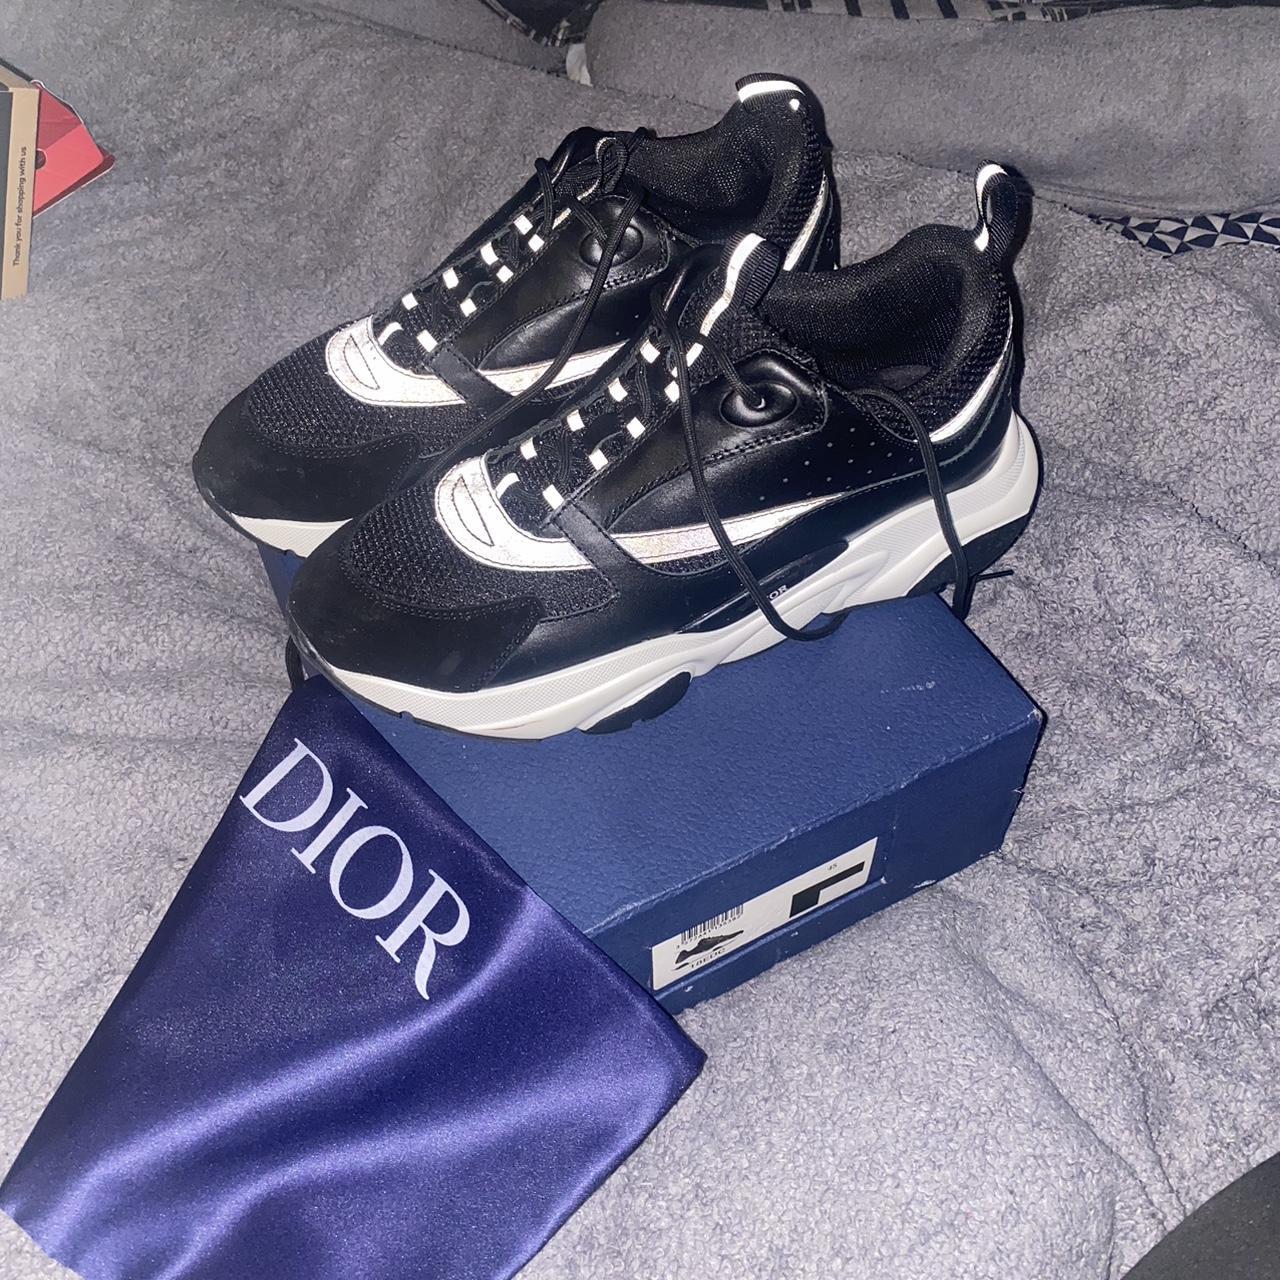 Dior B22s Reselling these as was sold on here and... - Depop